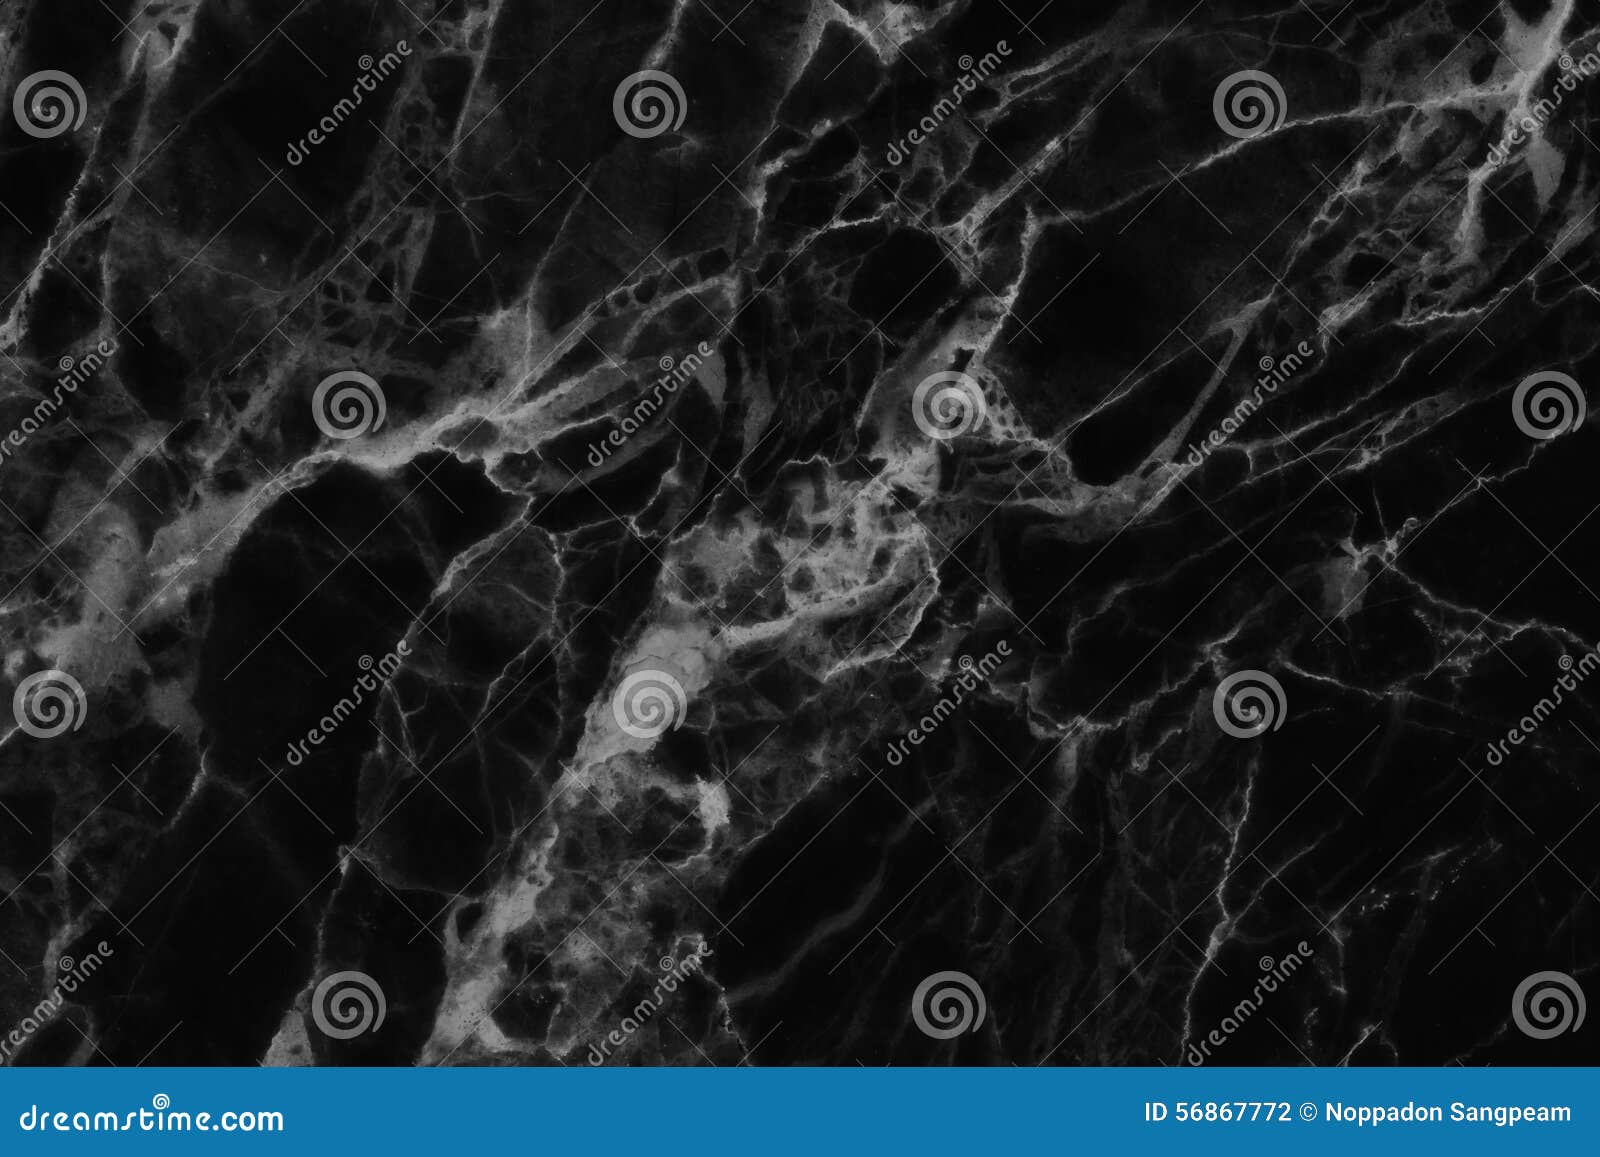 black marble texture, detailed structure of marble in natural patterned for background and .